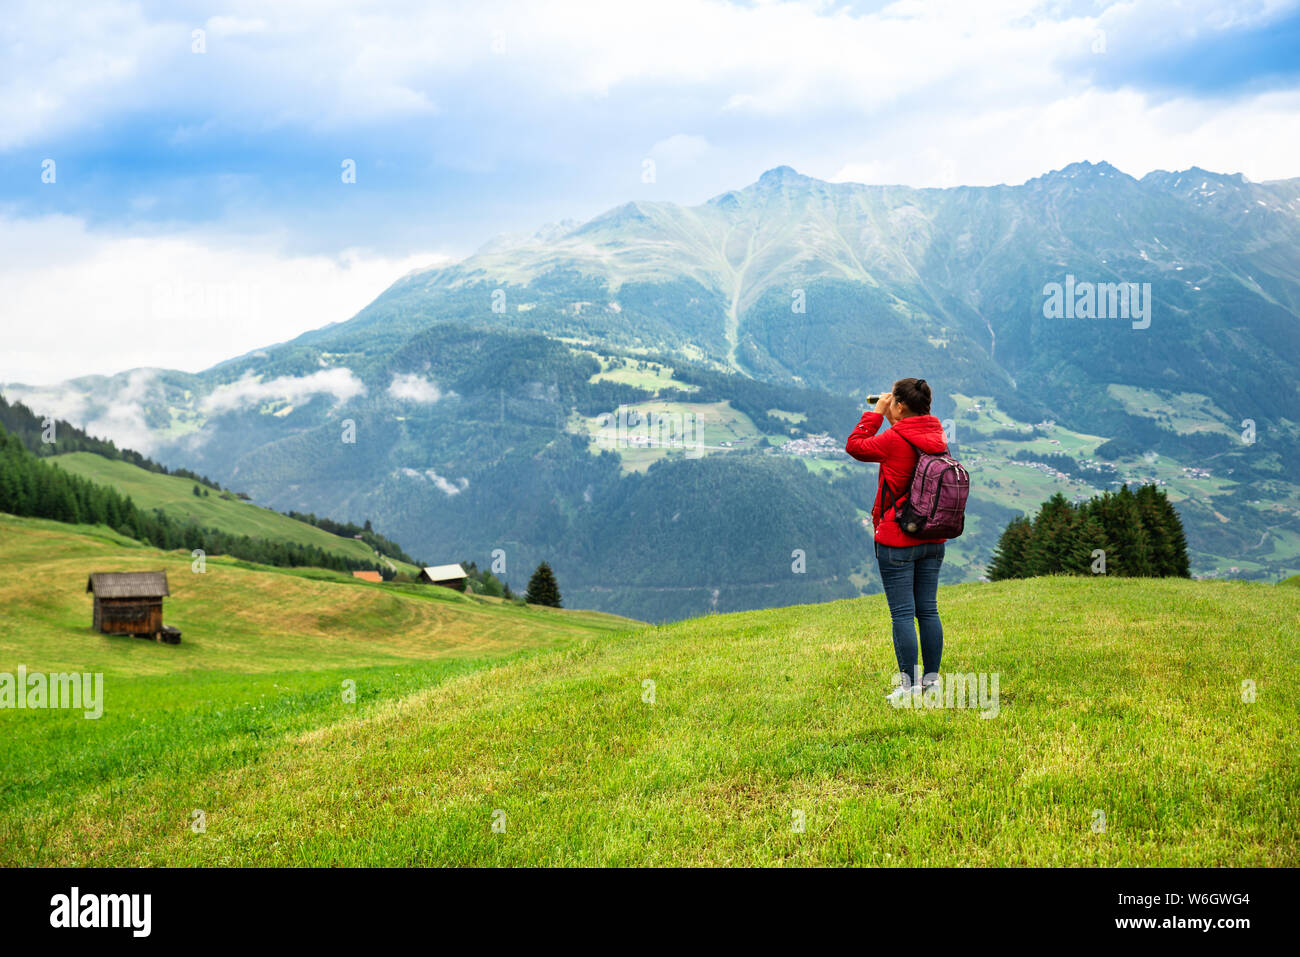 Woman With Backpack In Mountains Looking In Spyglass Stock Photo